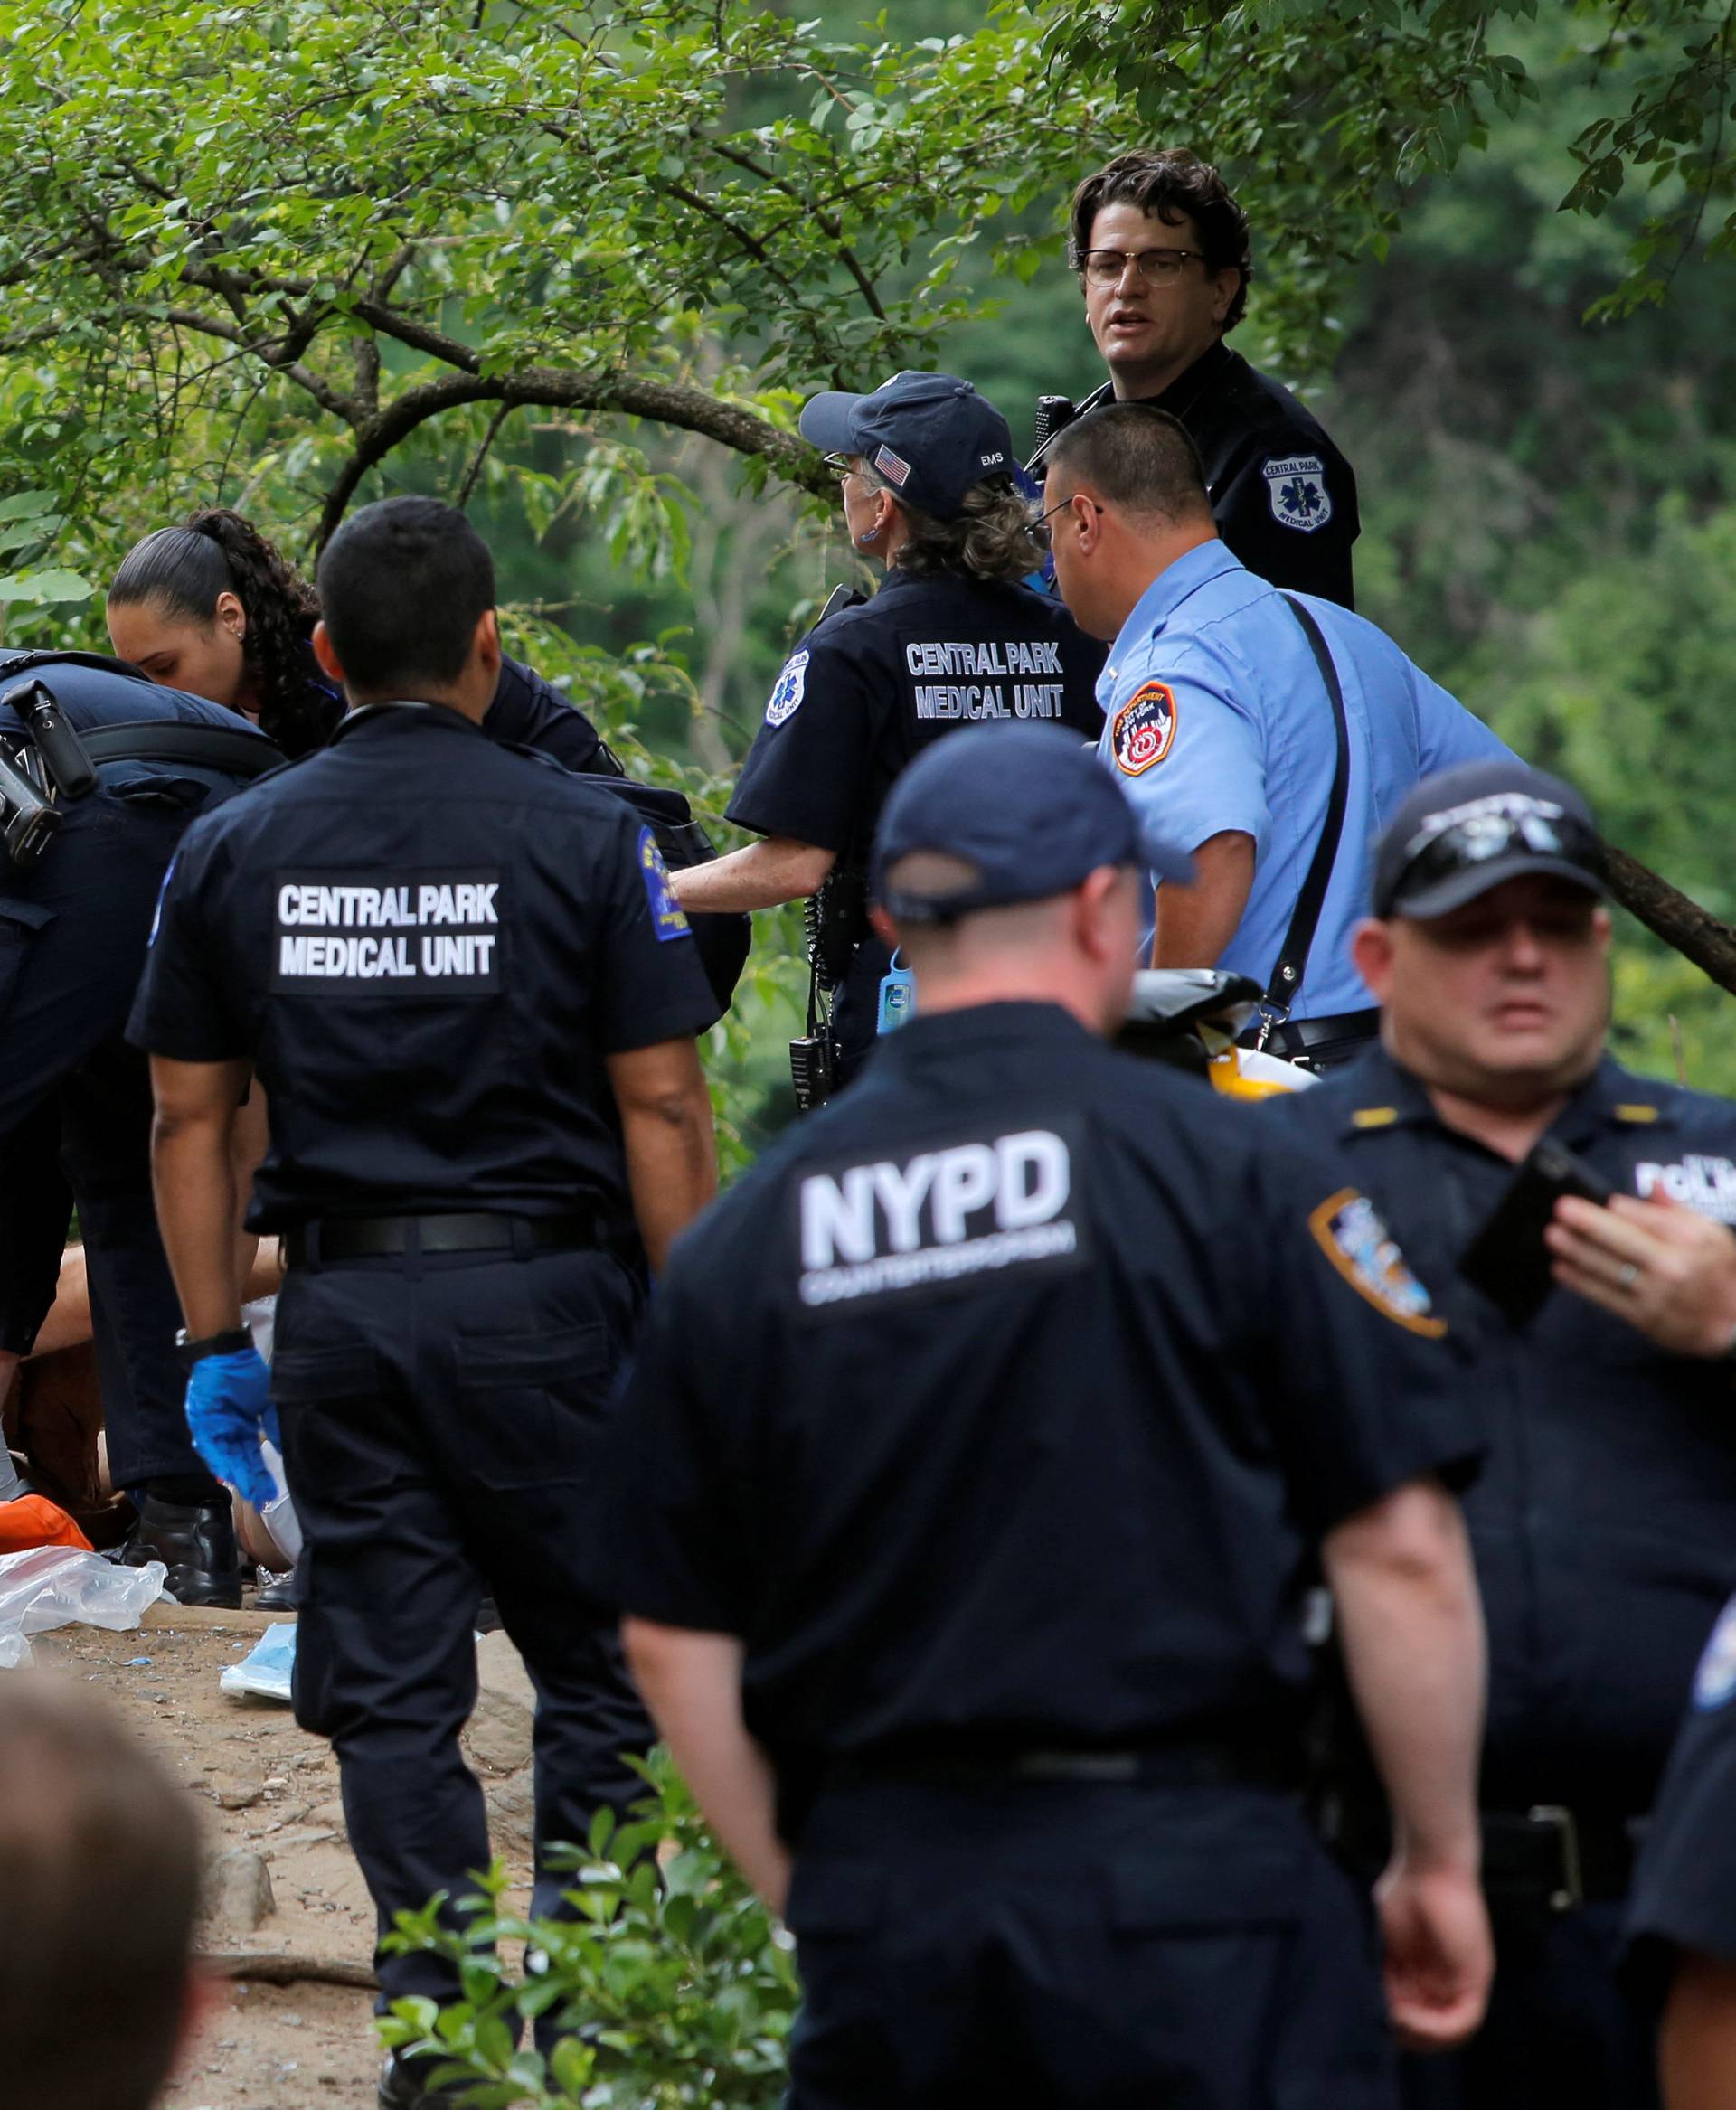 Medics treat a man who was injured after an explosion in Central Park in Manhattan, New York